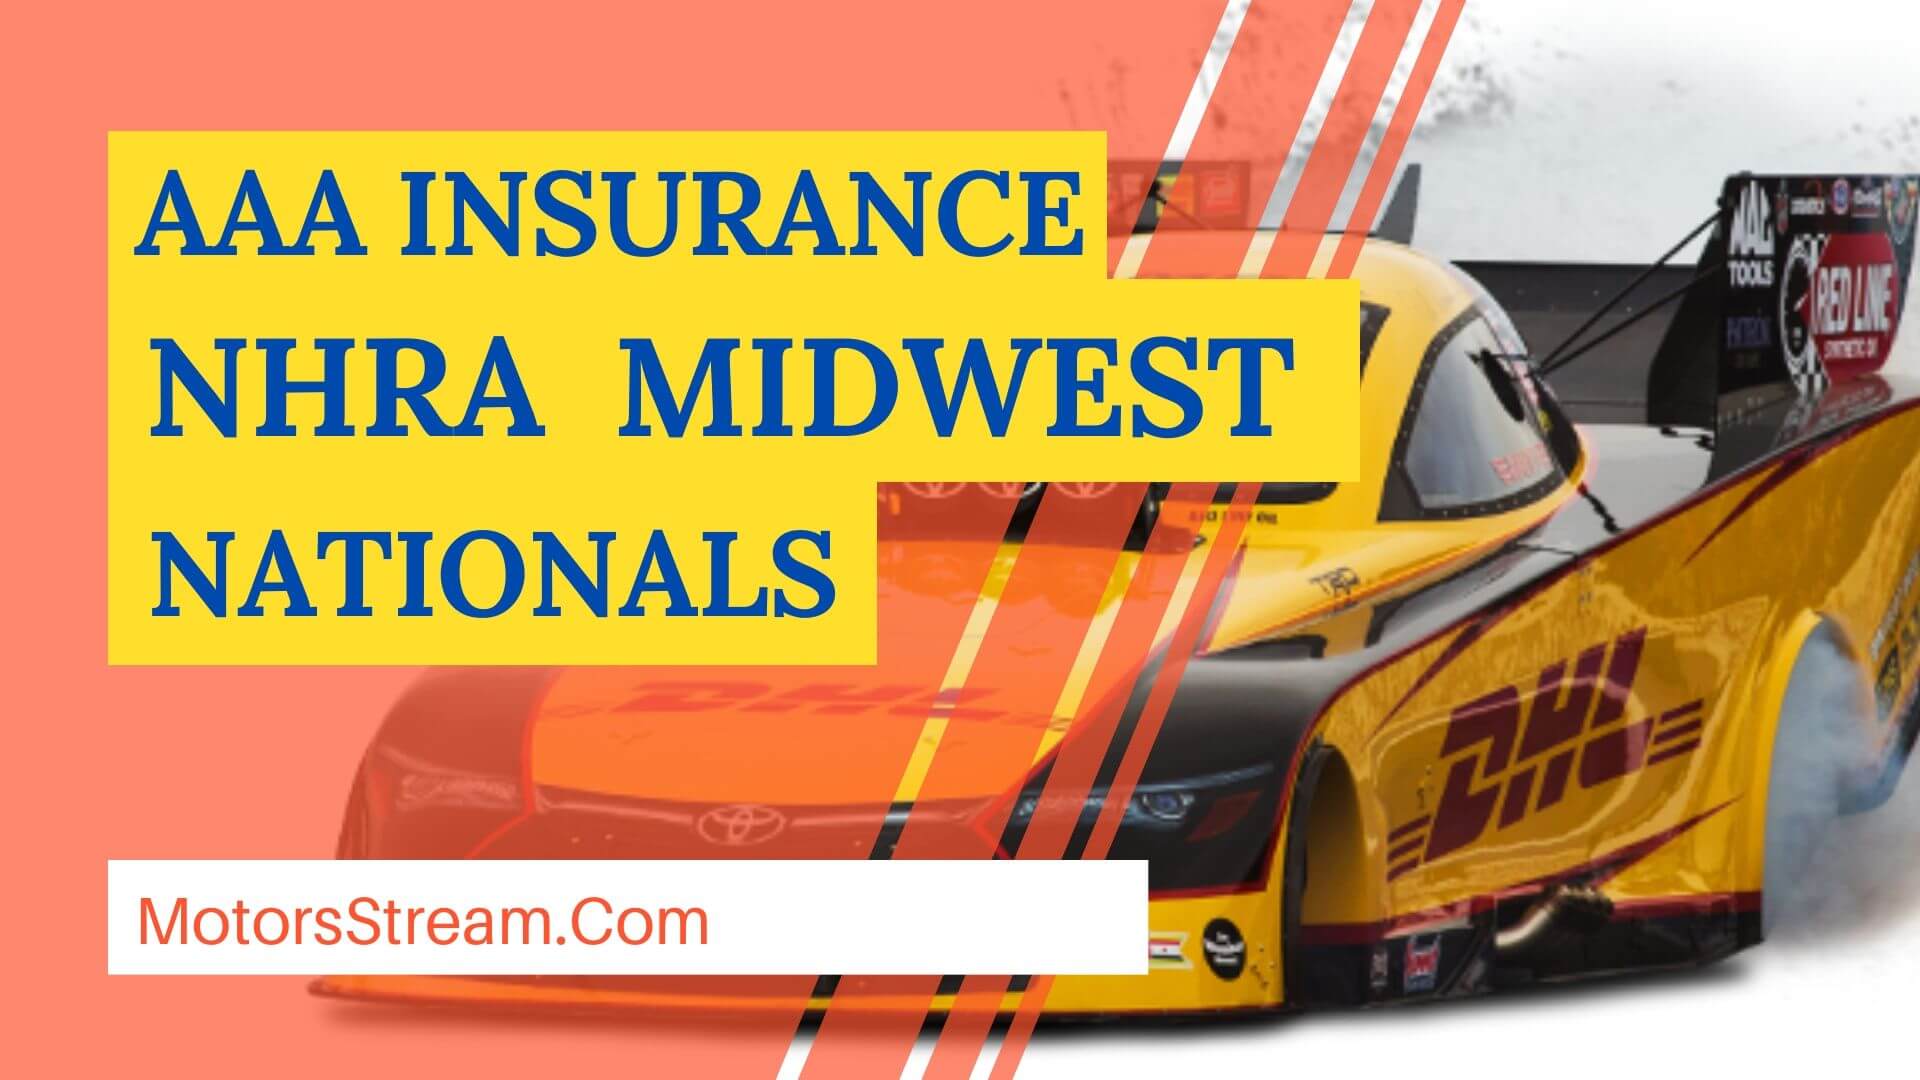 Live AAA Insurance NHRA Midwest Nationals Streaming